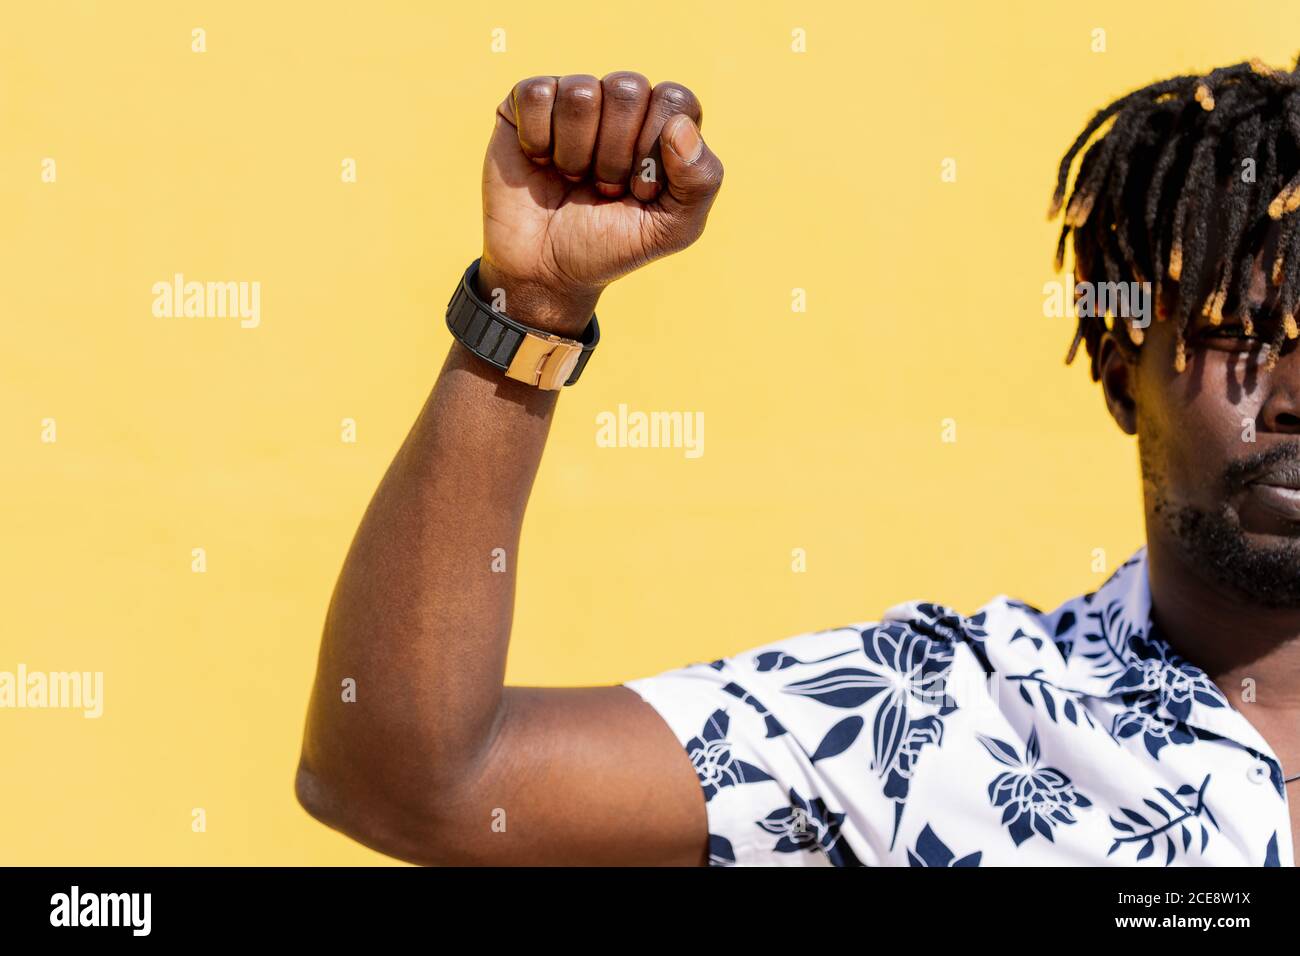 attractive young black man with raised fist on an intense yellow background, concept of human rights struggle and lifestyle, copy space for text Stock Photo